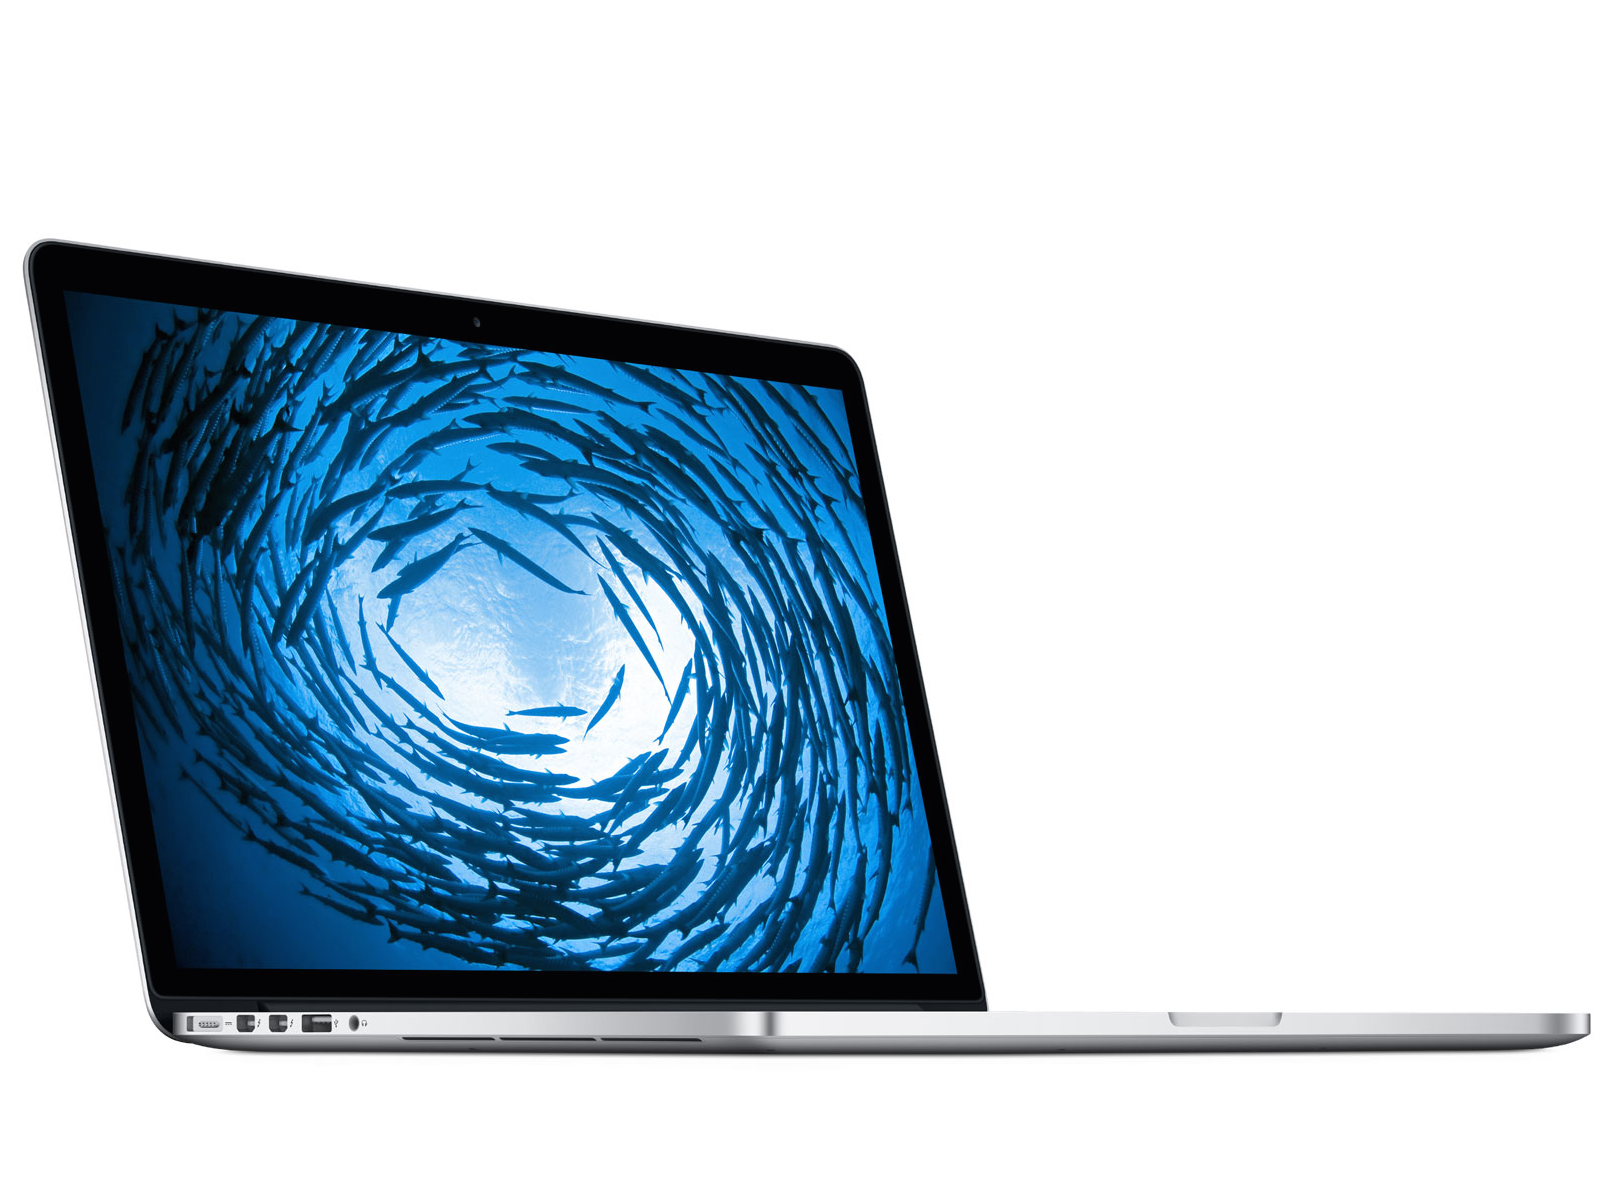 Apple MacBook Pro Retina 15 Late 2013 Notebook Review ...